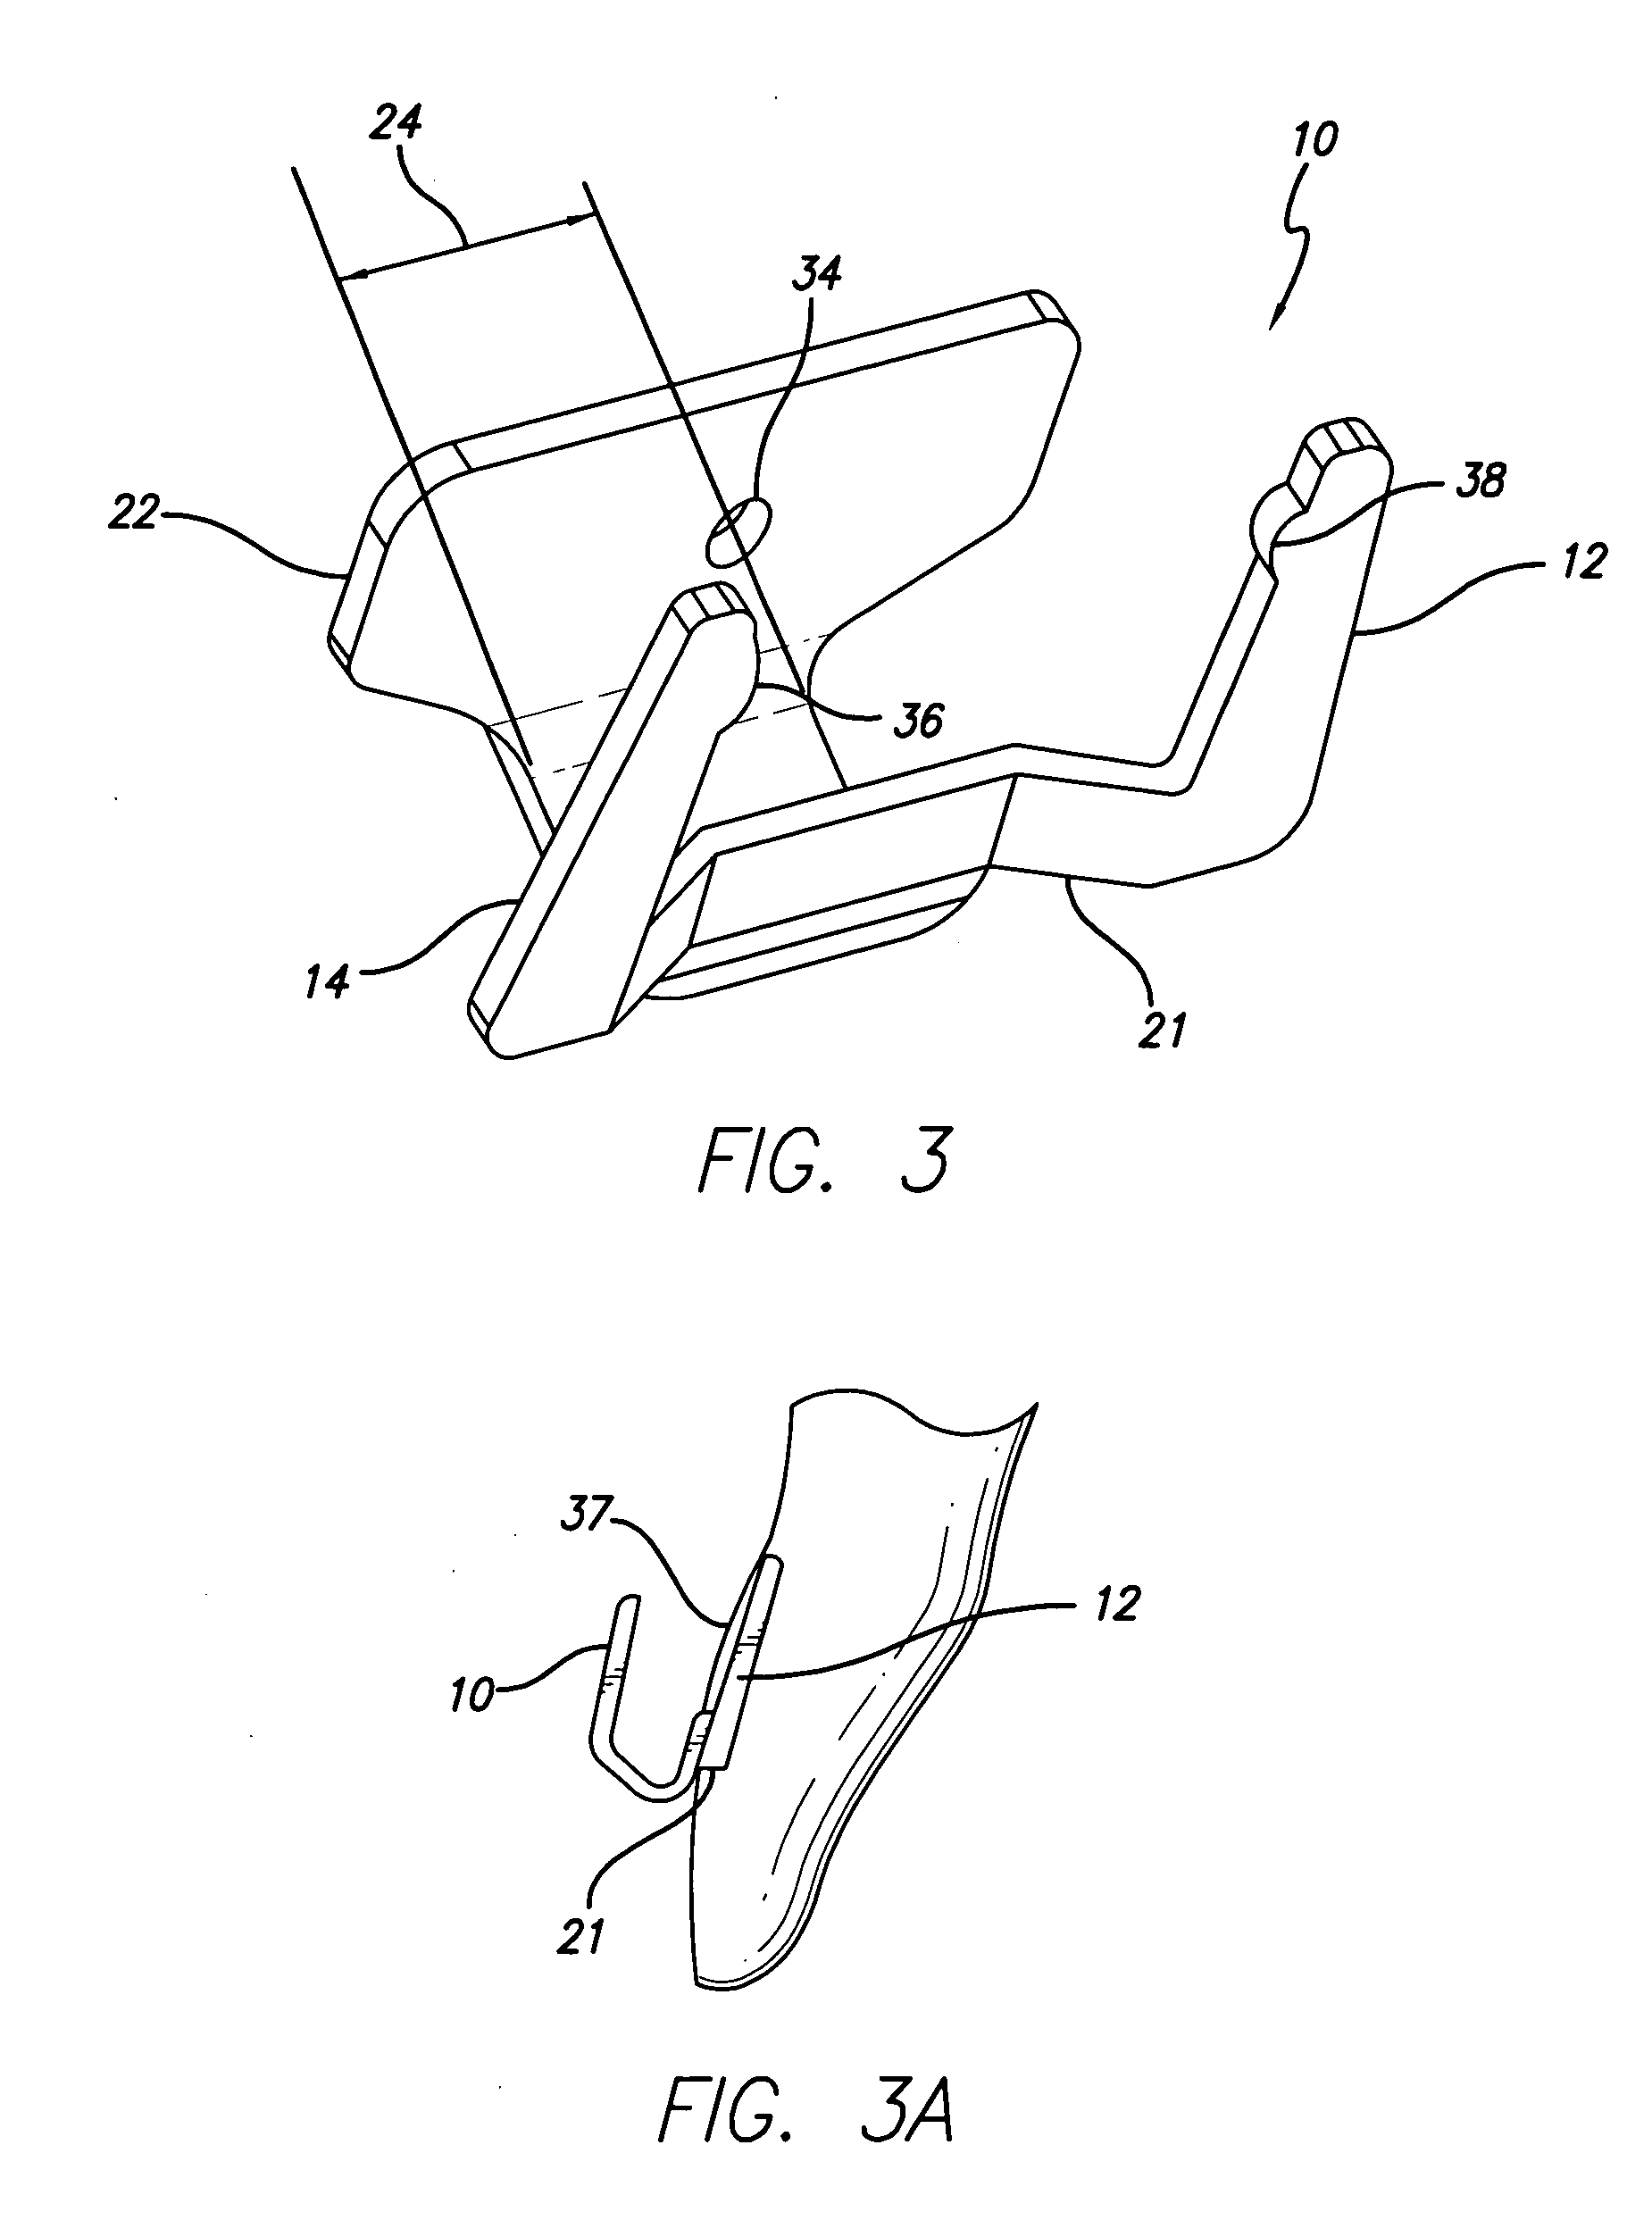 Low profile self-ligating bracket assembly and method of use